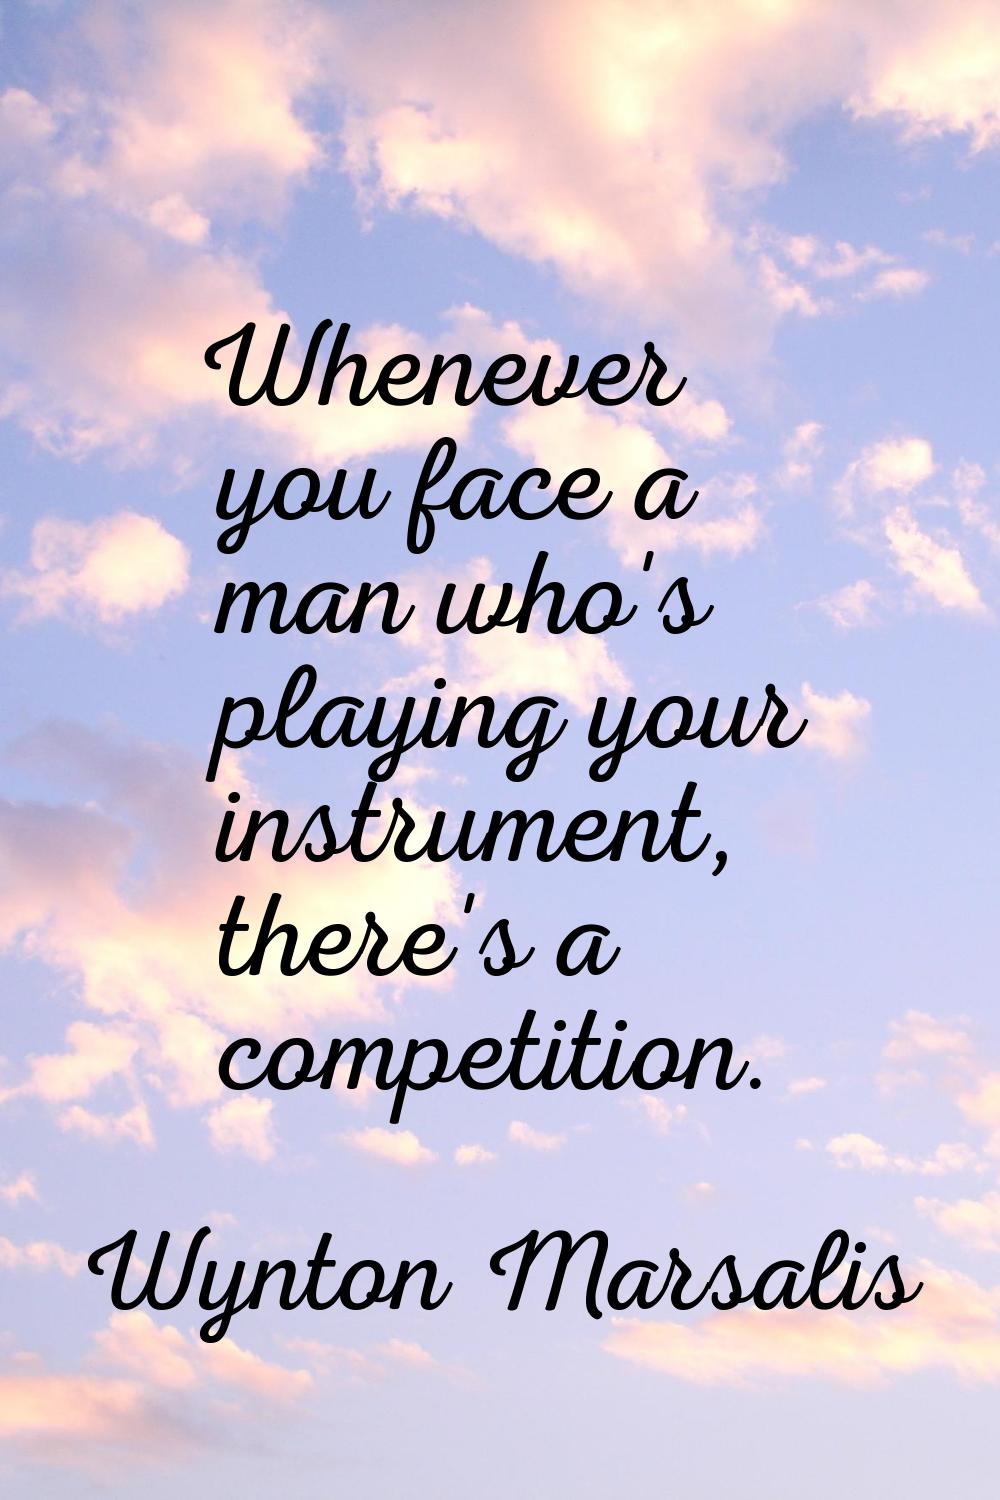 Whenever you face a man who's playing your instrument, there's a competition.